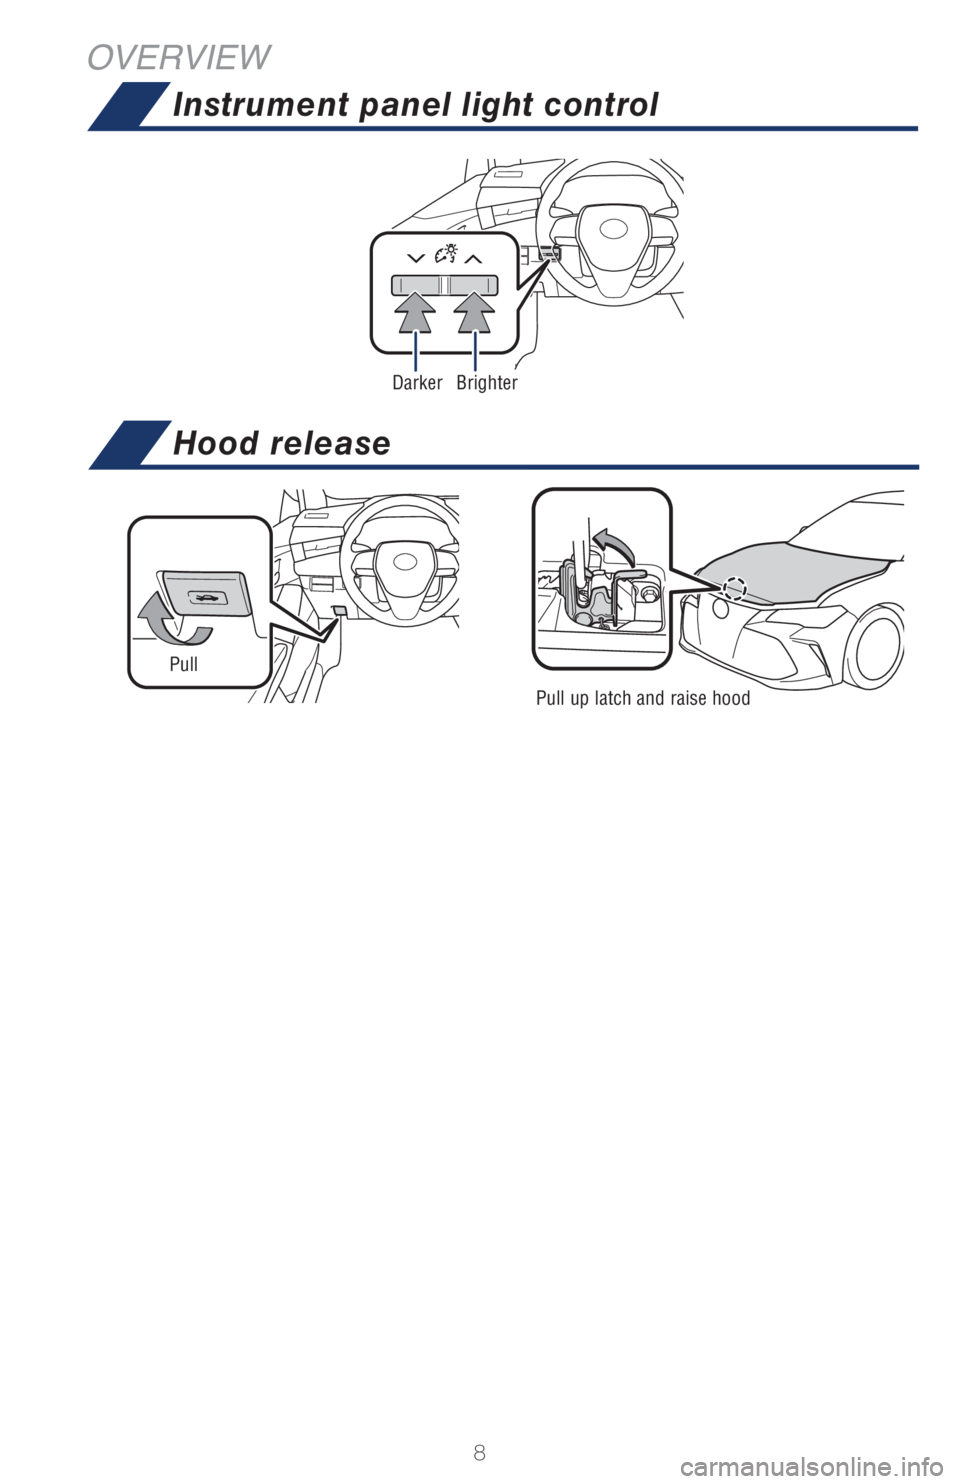 TOYOTA AVALON 2021  Owners Manual (in English) 8
OVERVIEW
Pull up latch and raise hood
Pull
Hood release
DarkerBrighter
Instrument panel light control
MY21_Avalon_QRG_V2_ML_0709.indd   87/13/20   1:14 PM 